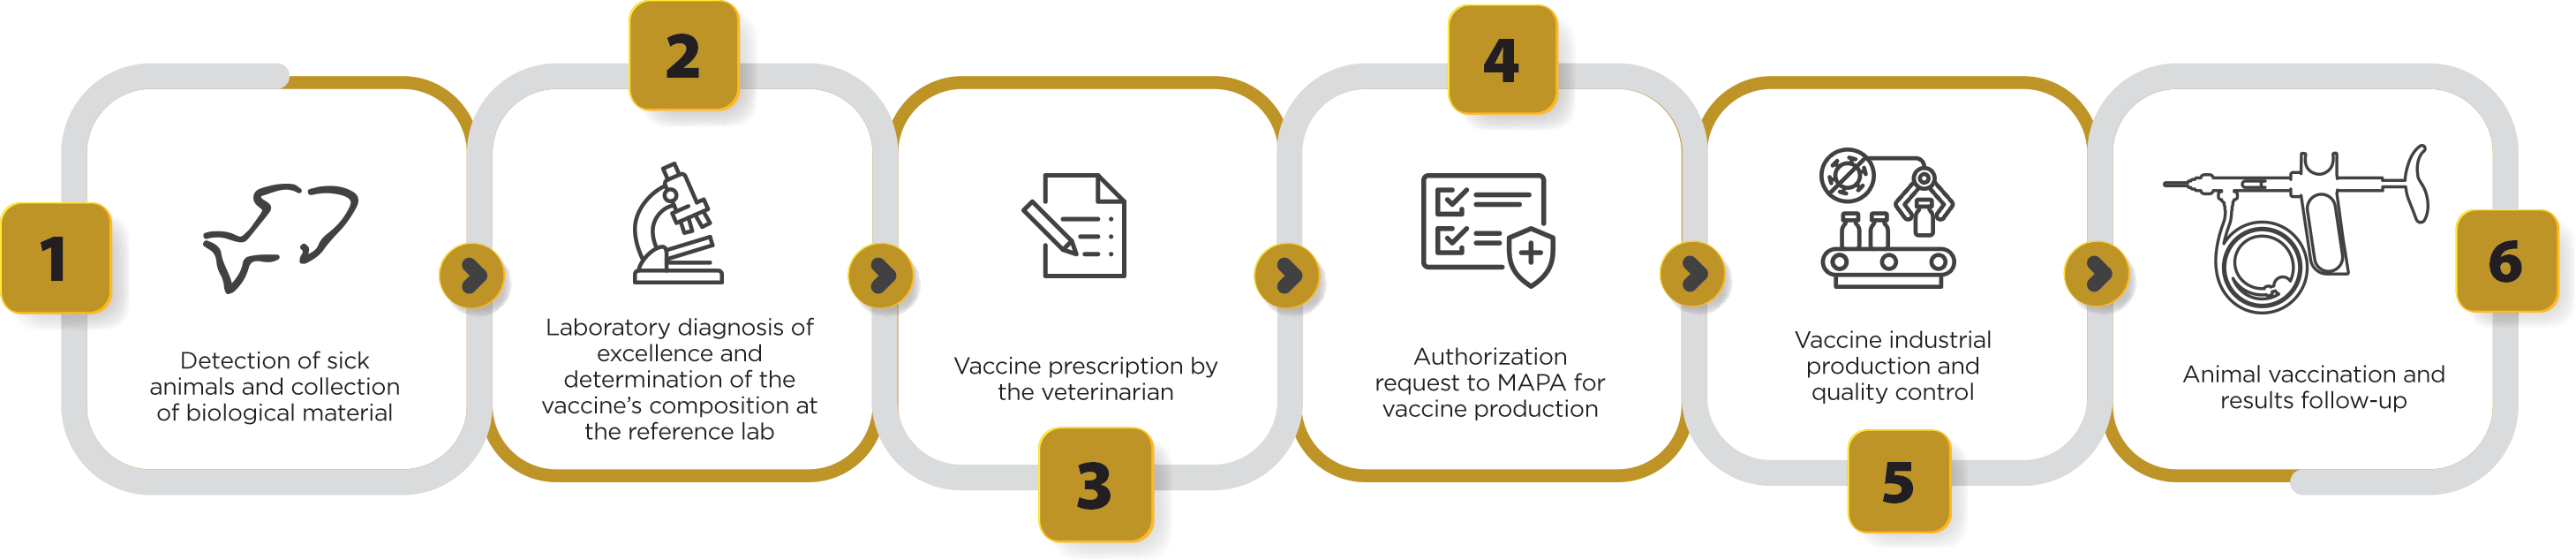 Figure 2. Stages of clinical sample collection, laboratory diagnosis, vaccine prescription by the veterinarian, authorization request to MAPA and production of autogenous vaccines used for tilapia culture.